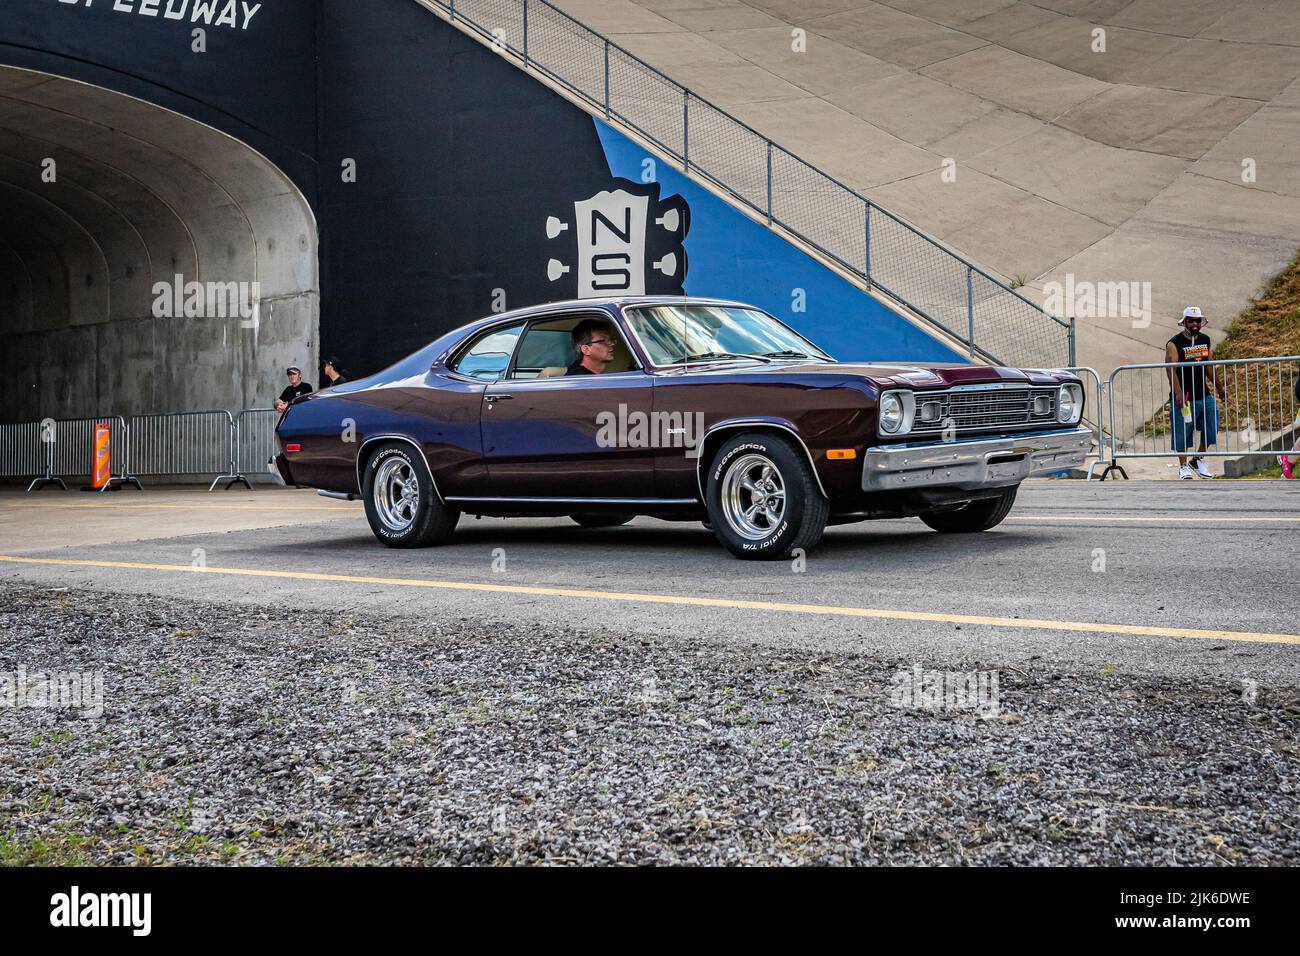 Lebanon, TN - May 14, 2022: Wide angle front corner view of a 1973 Plymouth Duster Hardtop Coupe leaving a local car show. Stock Photo